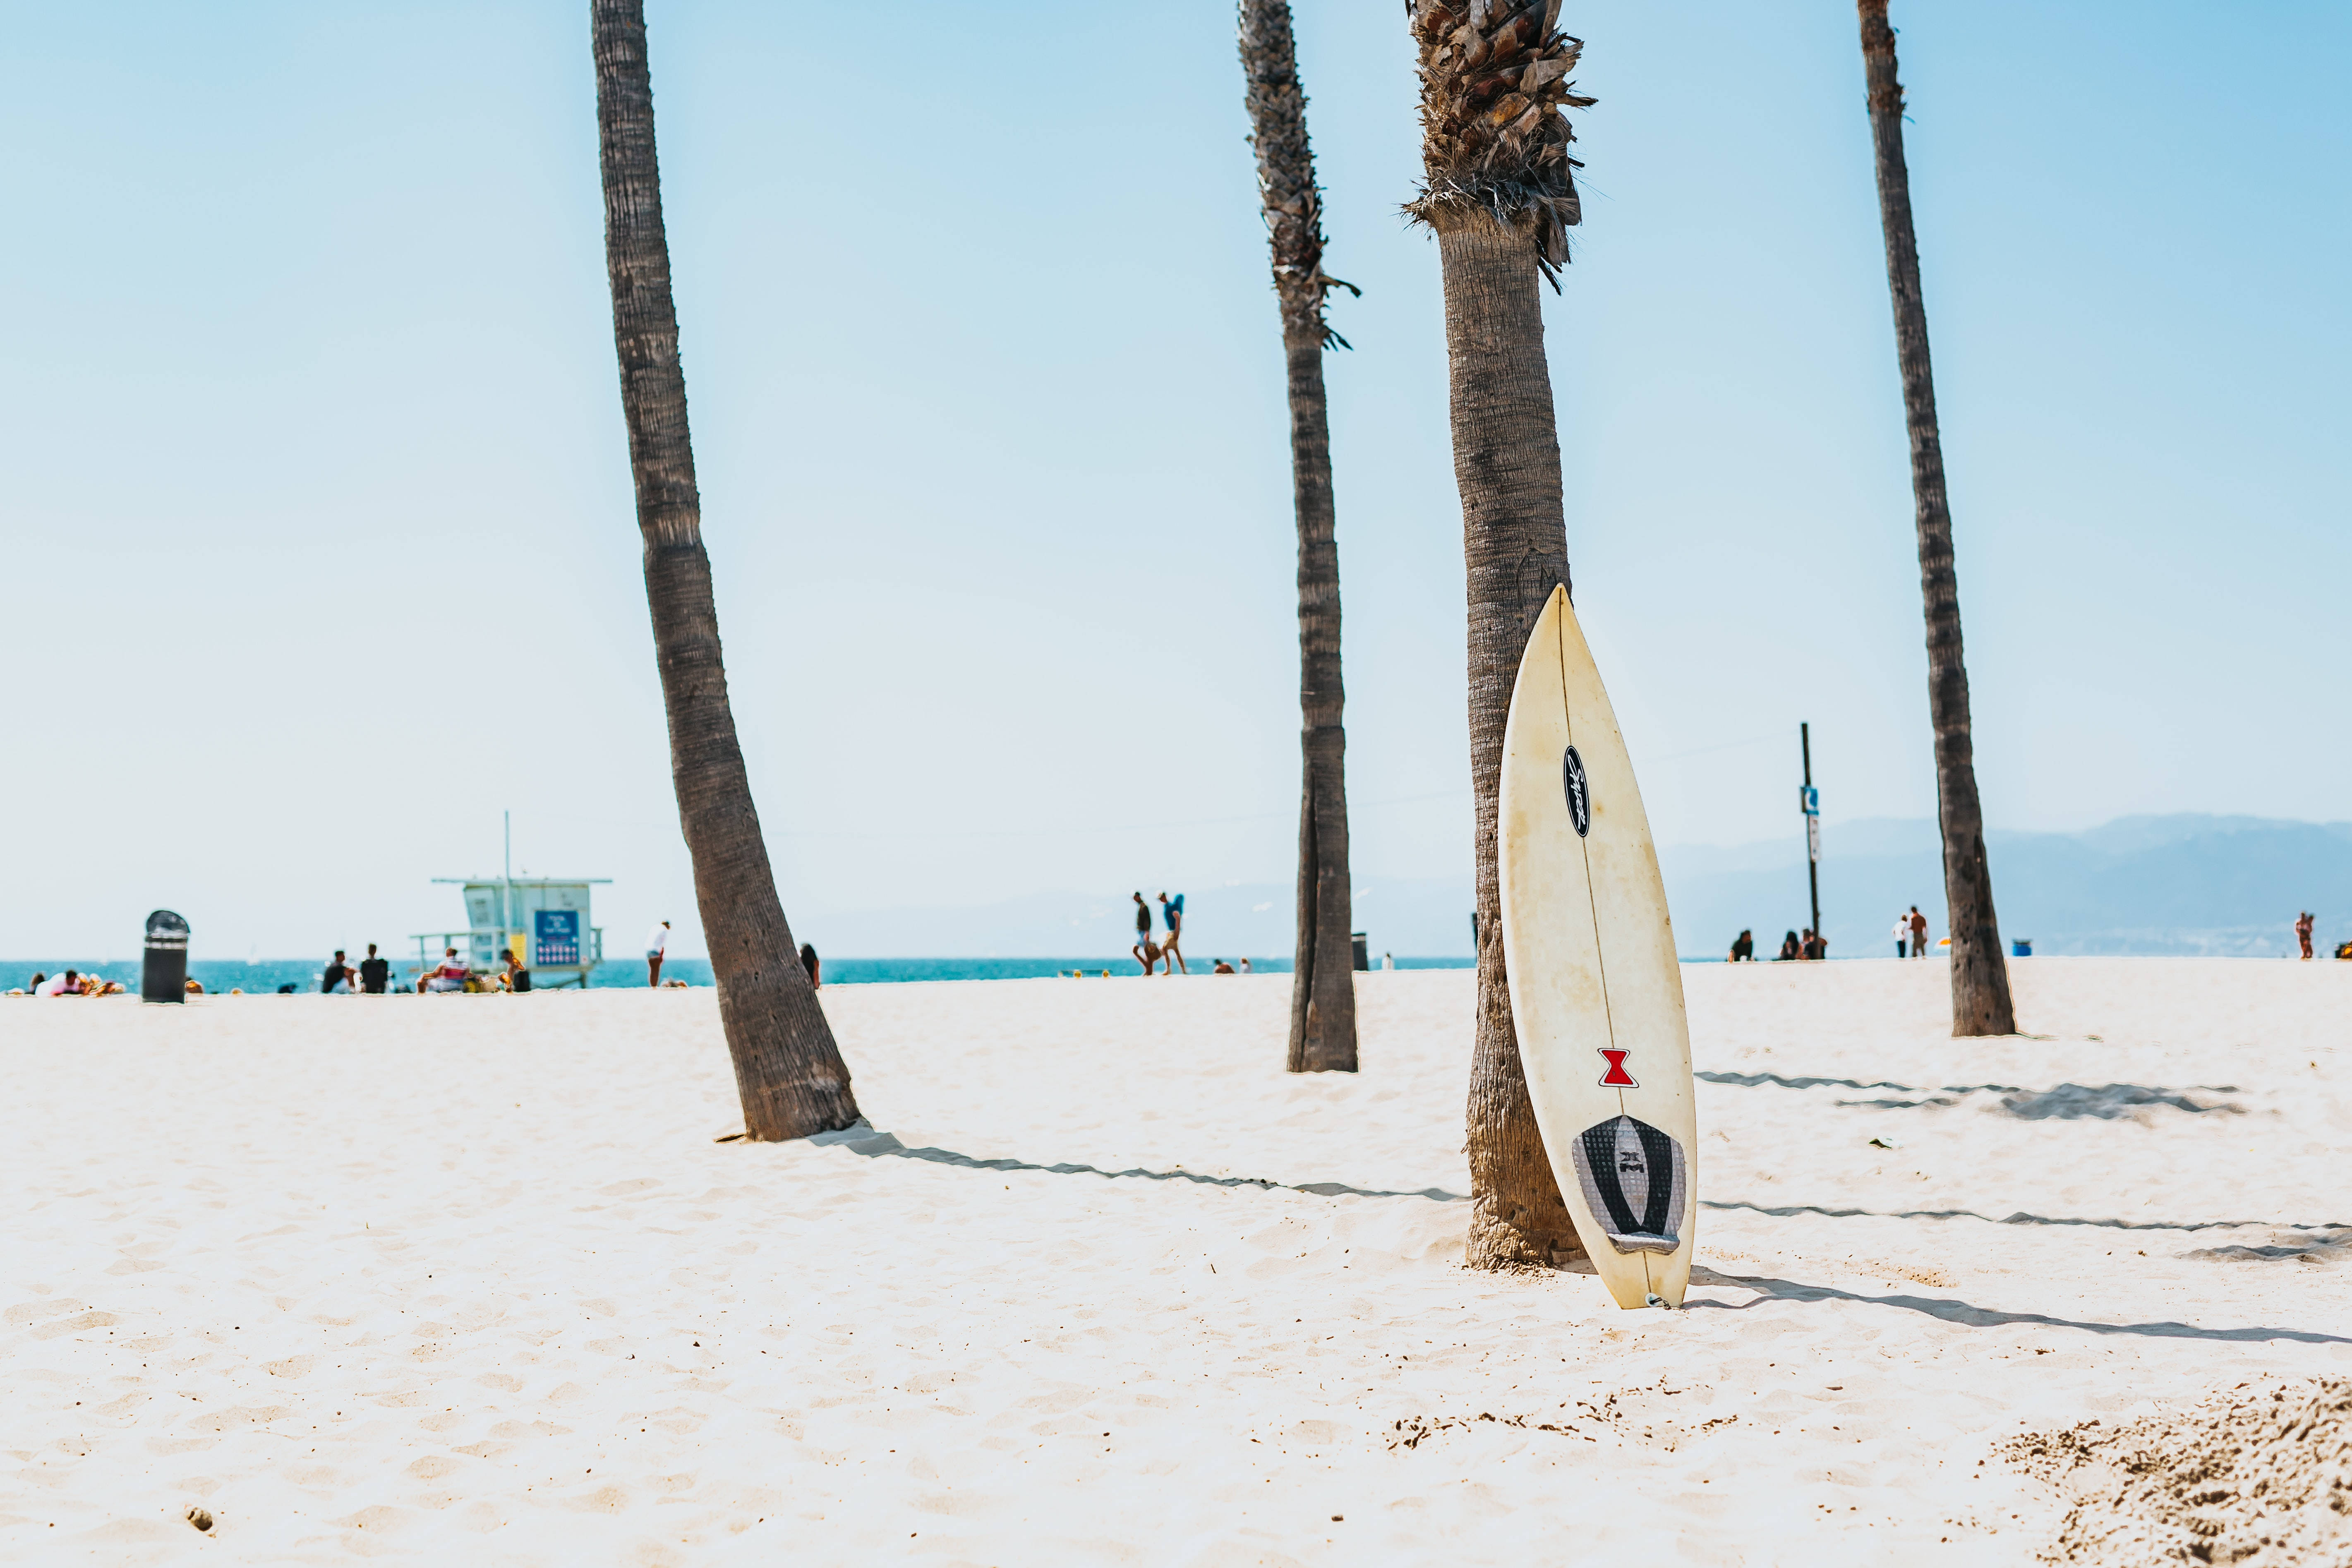 1920x1080 Hd Beach Desktop Surfboard And Palm Tree Picture